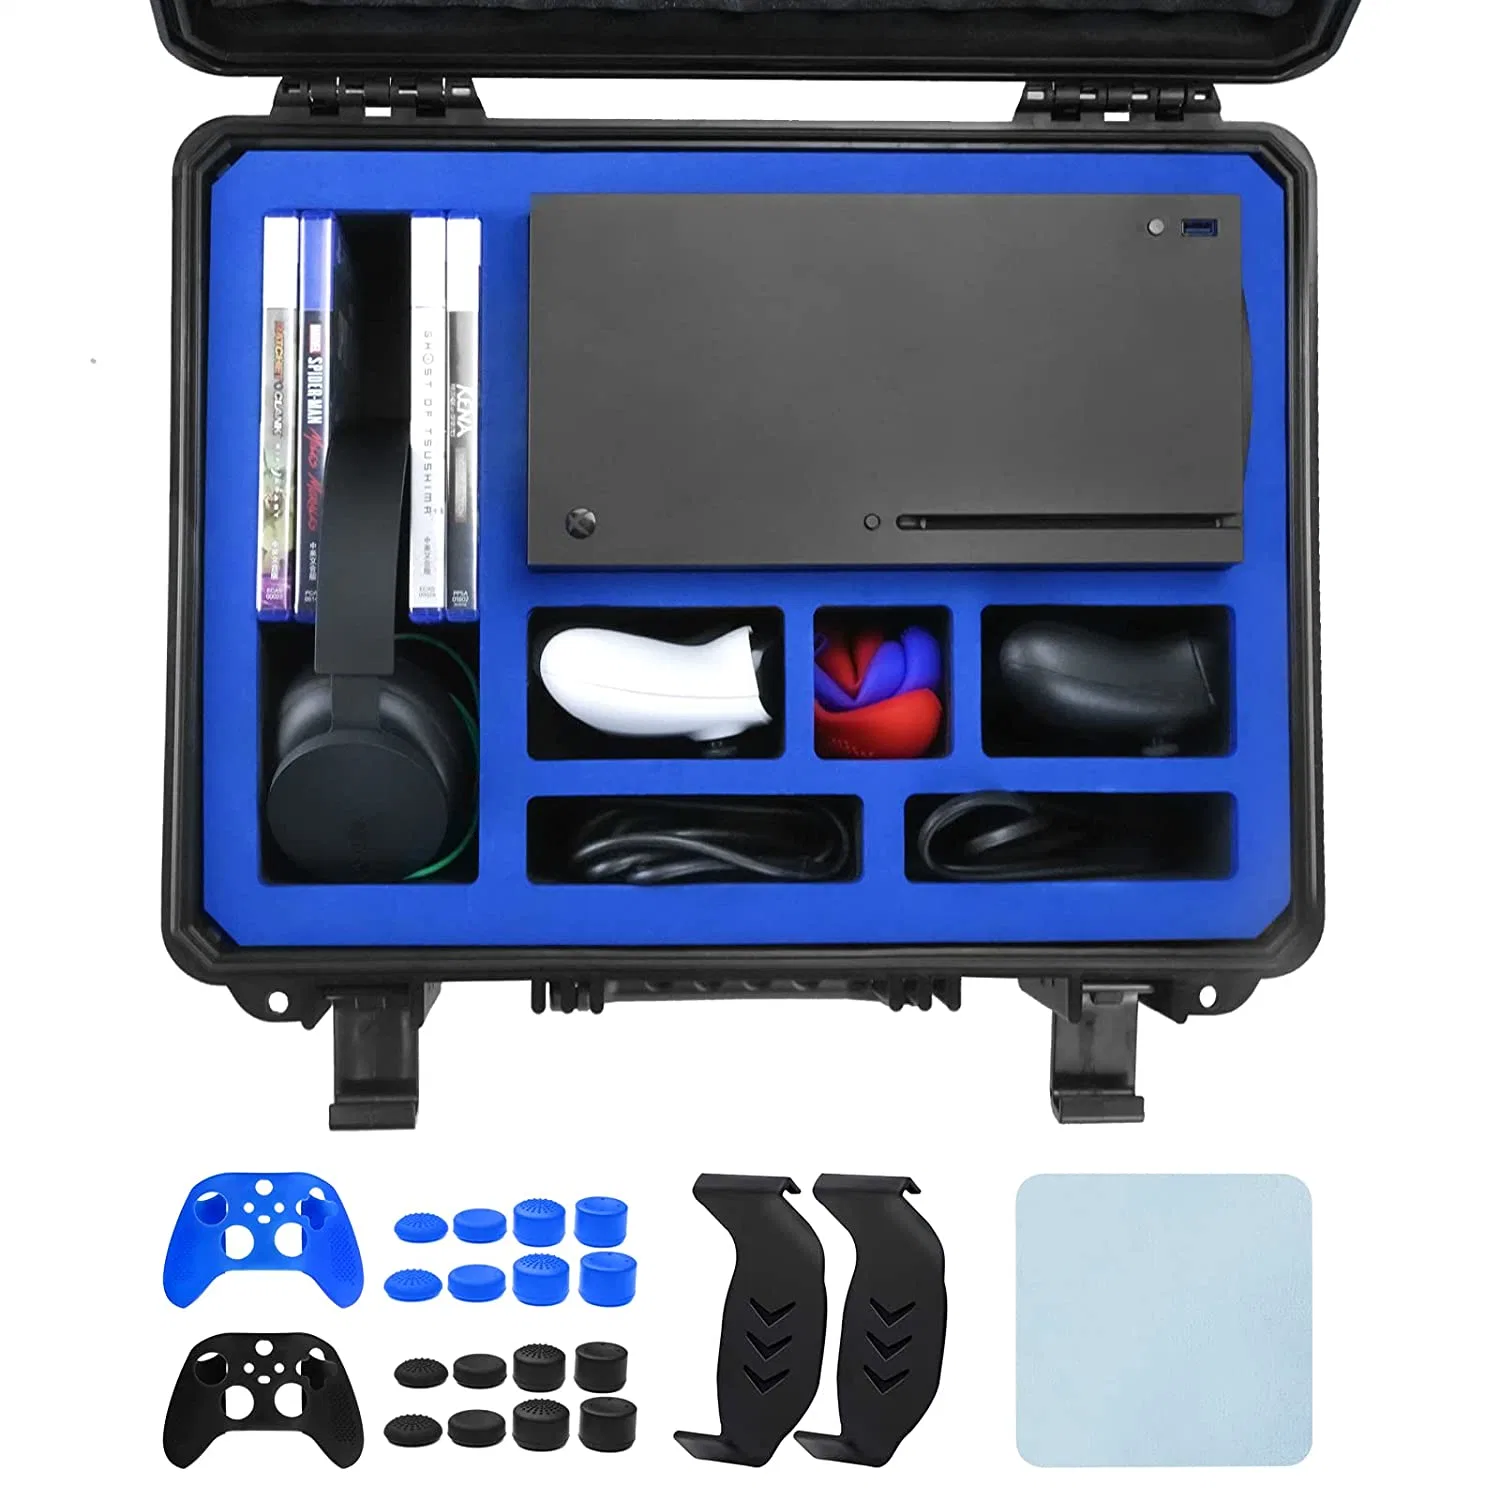 Hard Shell Carrying Cases Large Waterproof Toolbox with Foam Portable Protective Storage Box for Travel